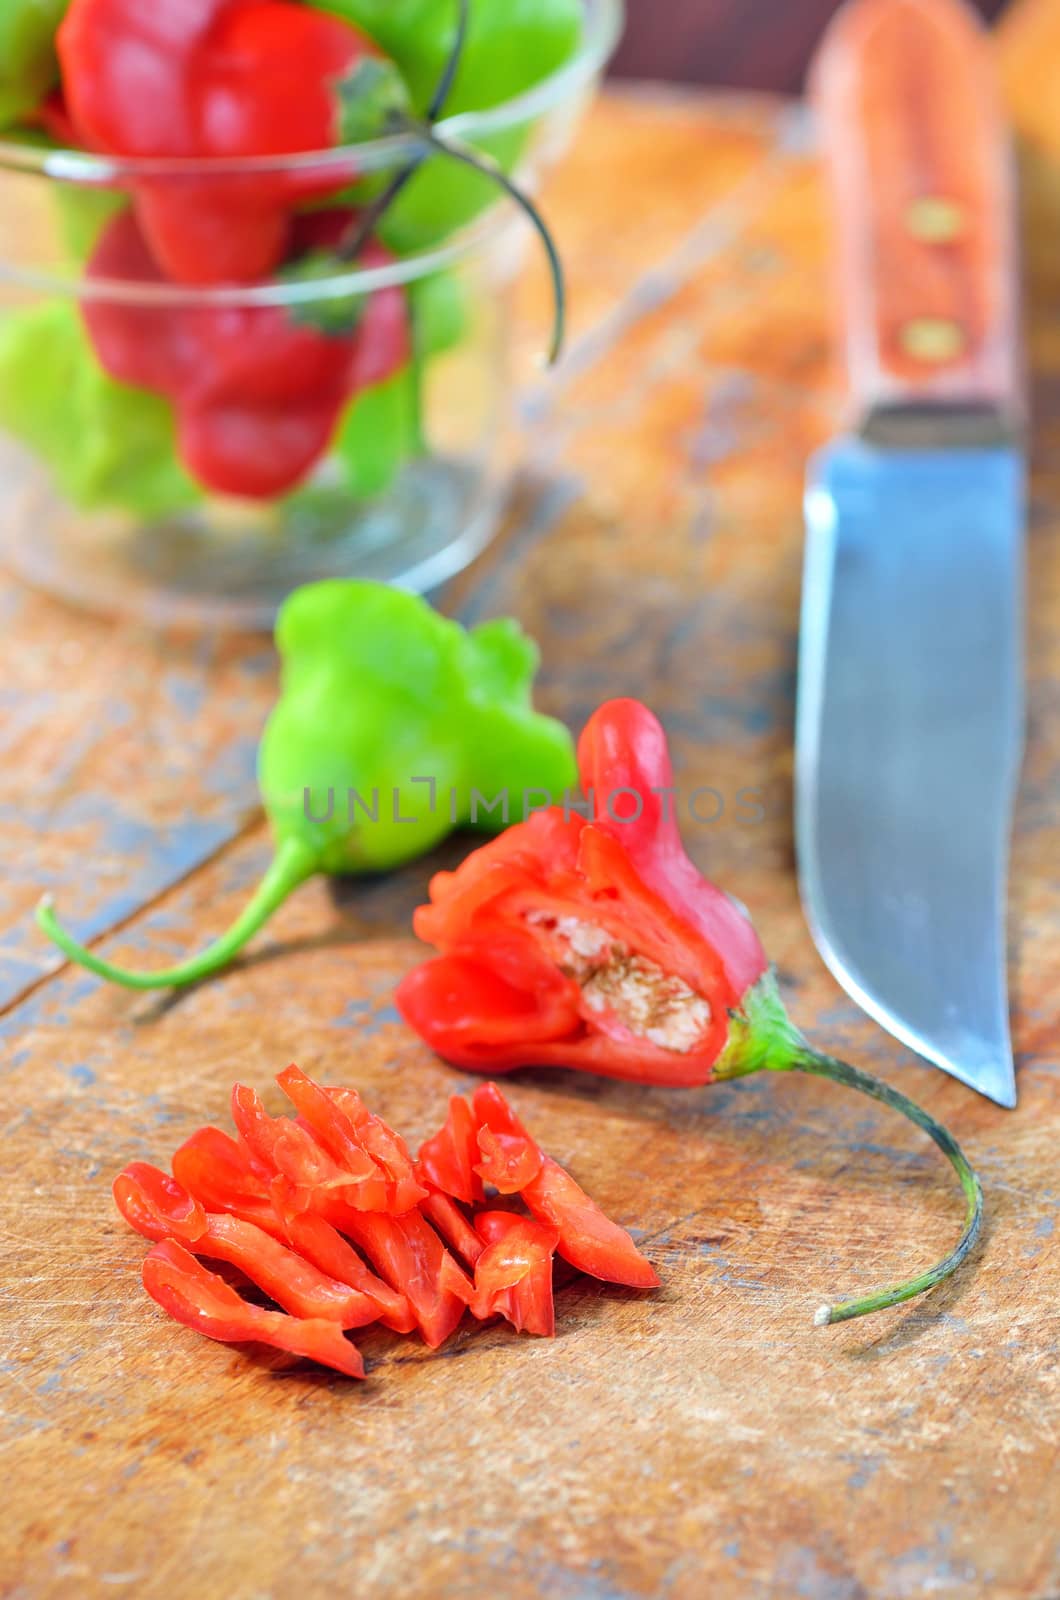 Hot Chili Peppers by mady70